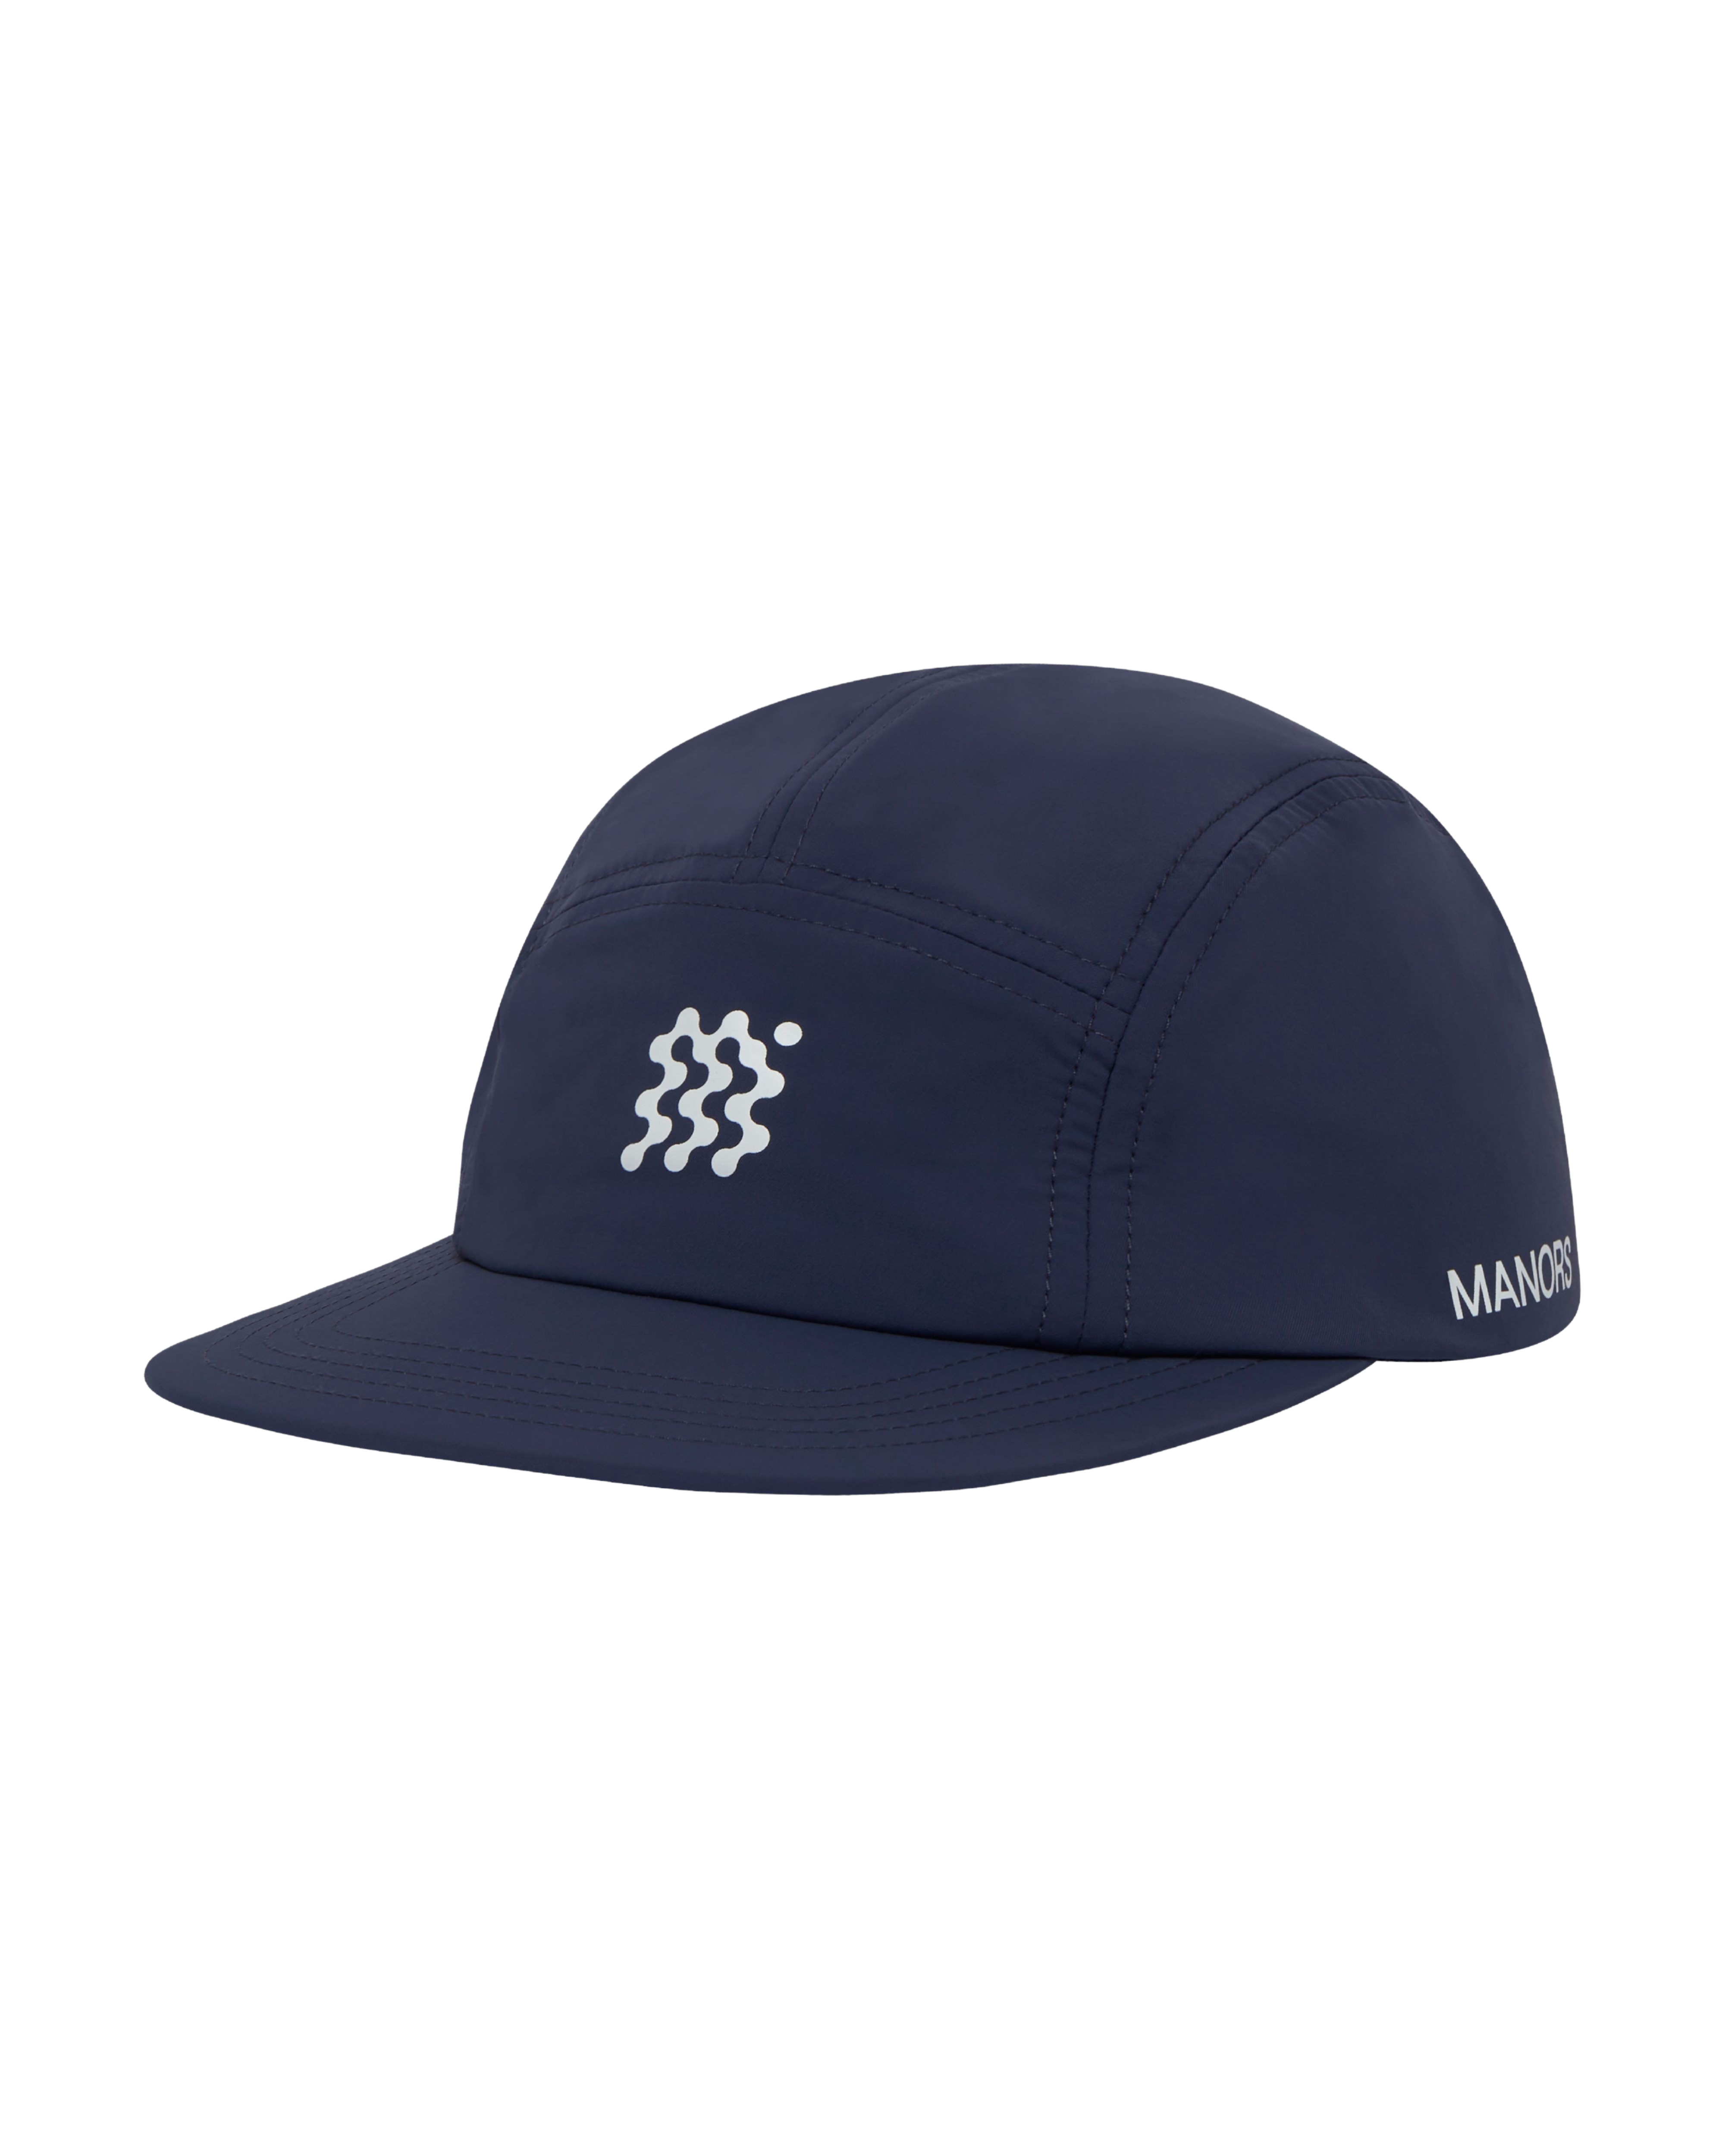 MANORS Frontier Tech Cap Navy | golf and sports fashion brands at agorabkk 